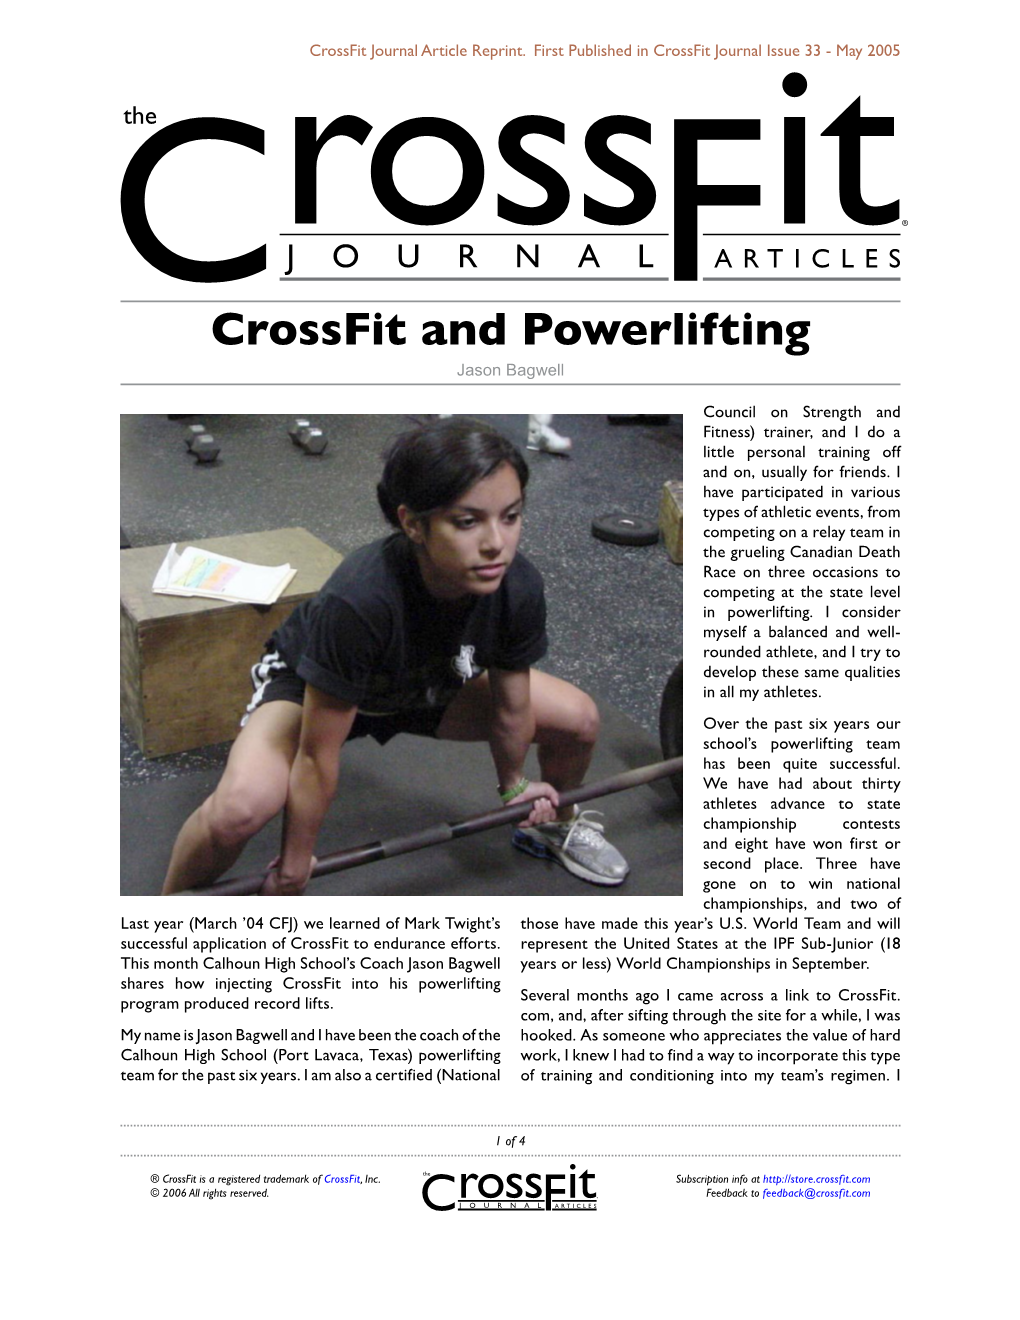 Crossfit and Powerlifting Jason Bagwell